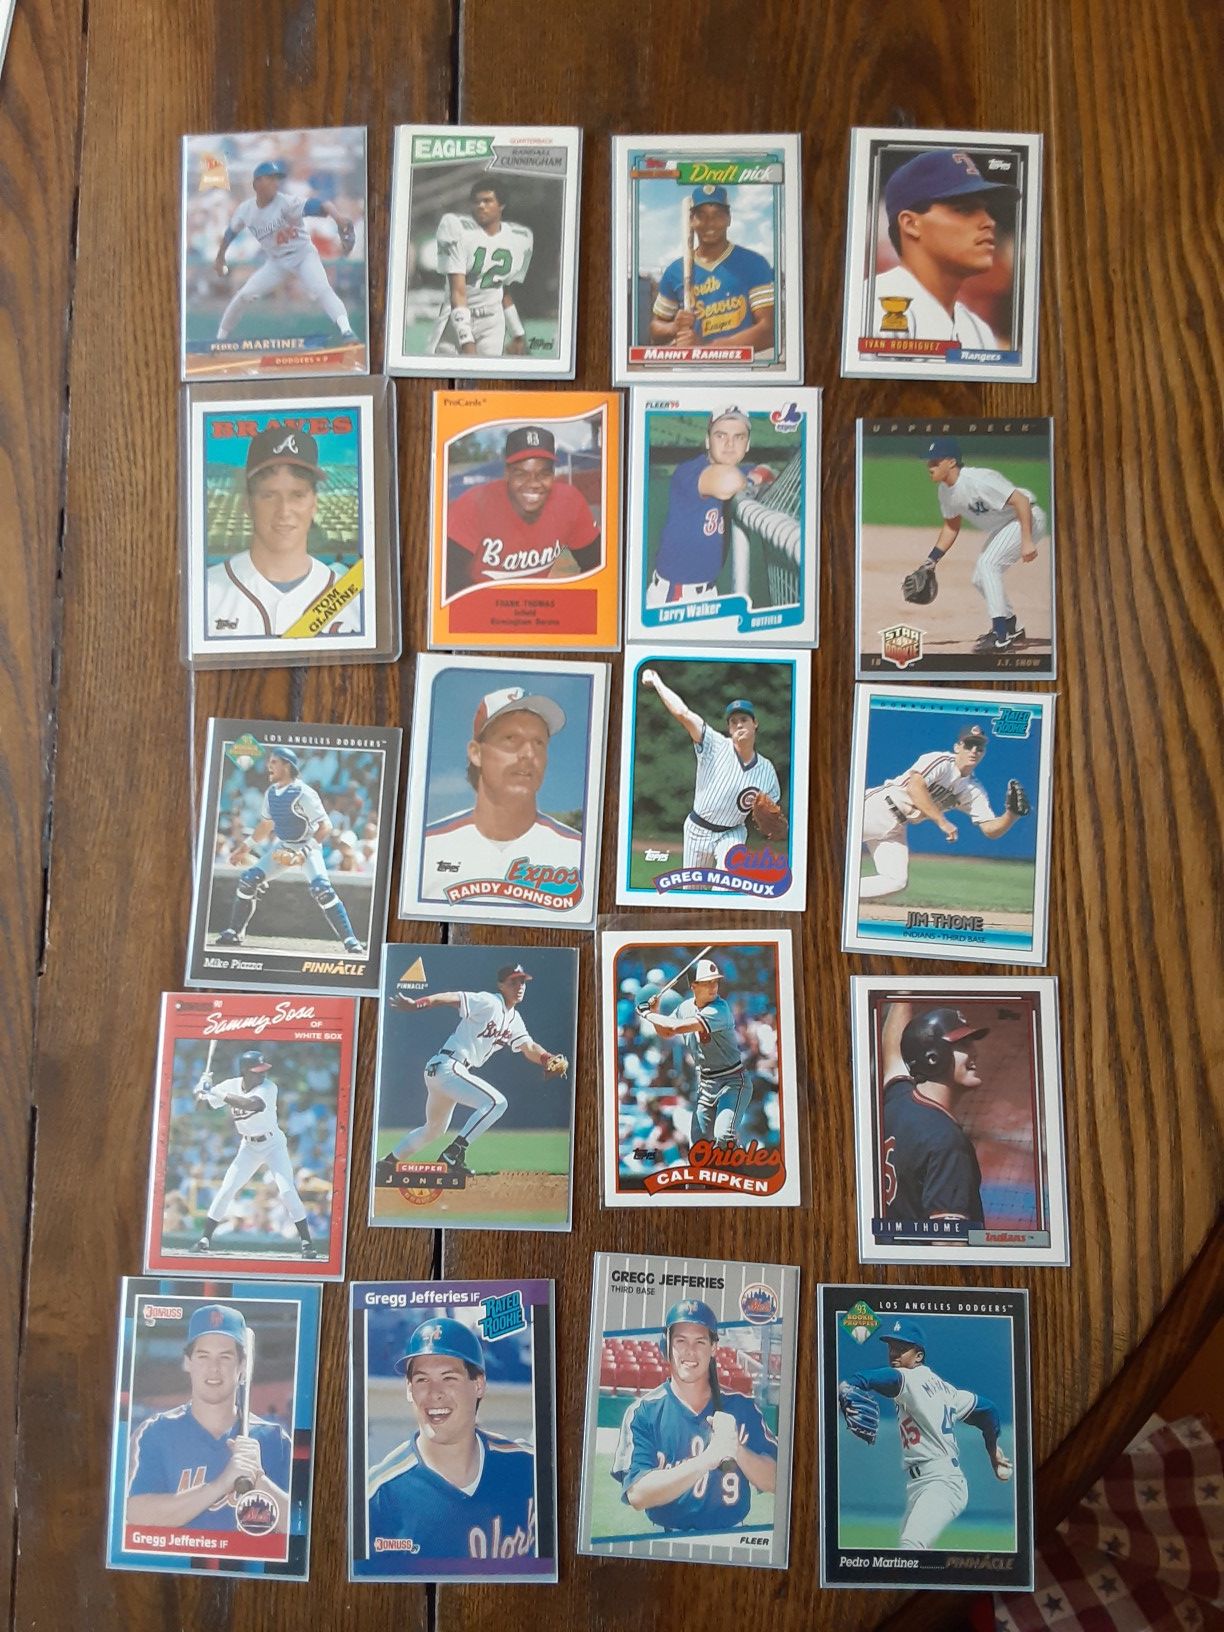 Frank Thomas Pedro Manny Randy they are in here Rookie Cards in Mint condition